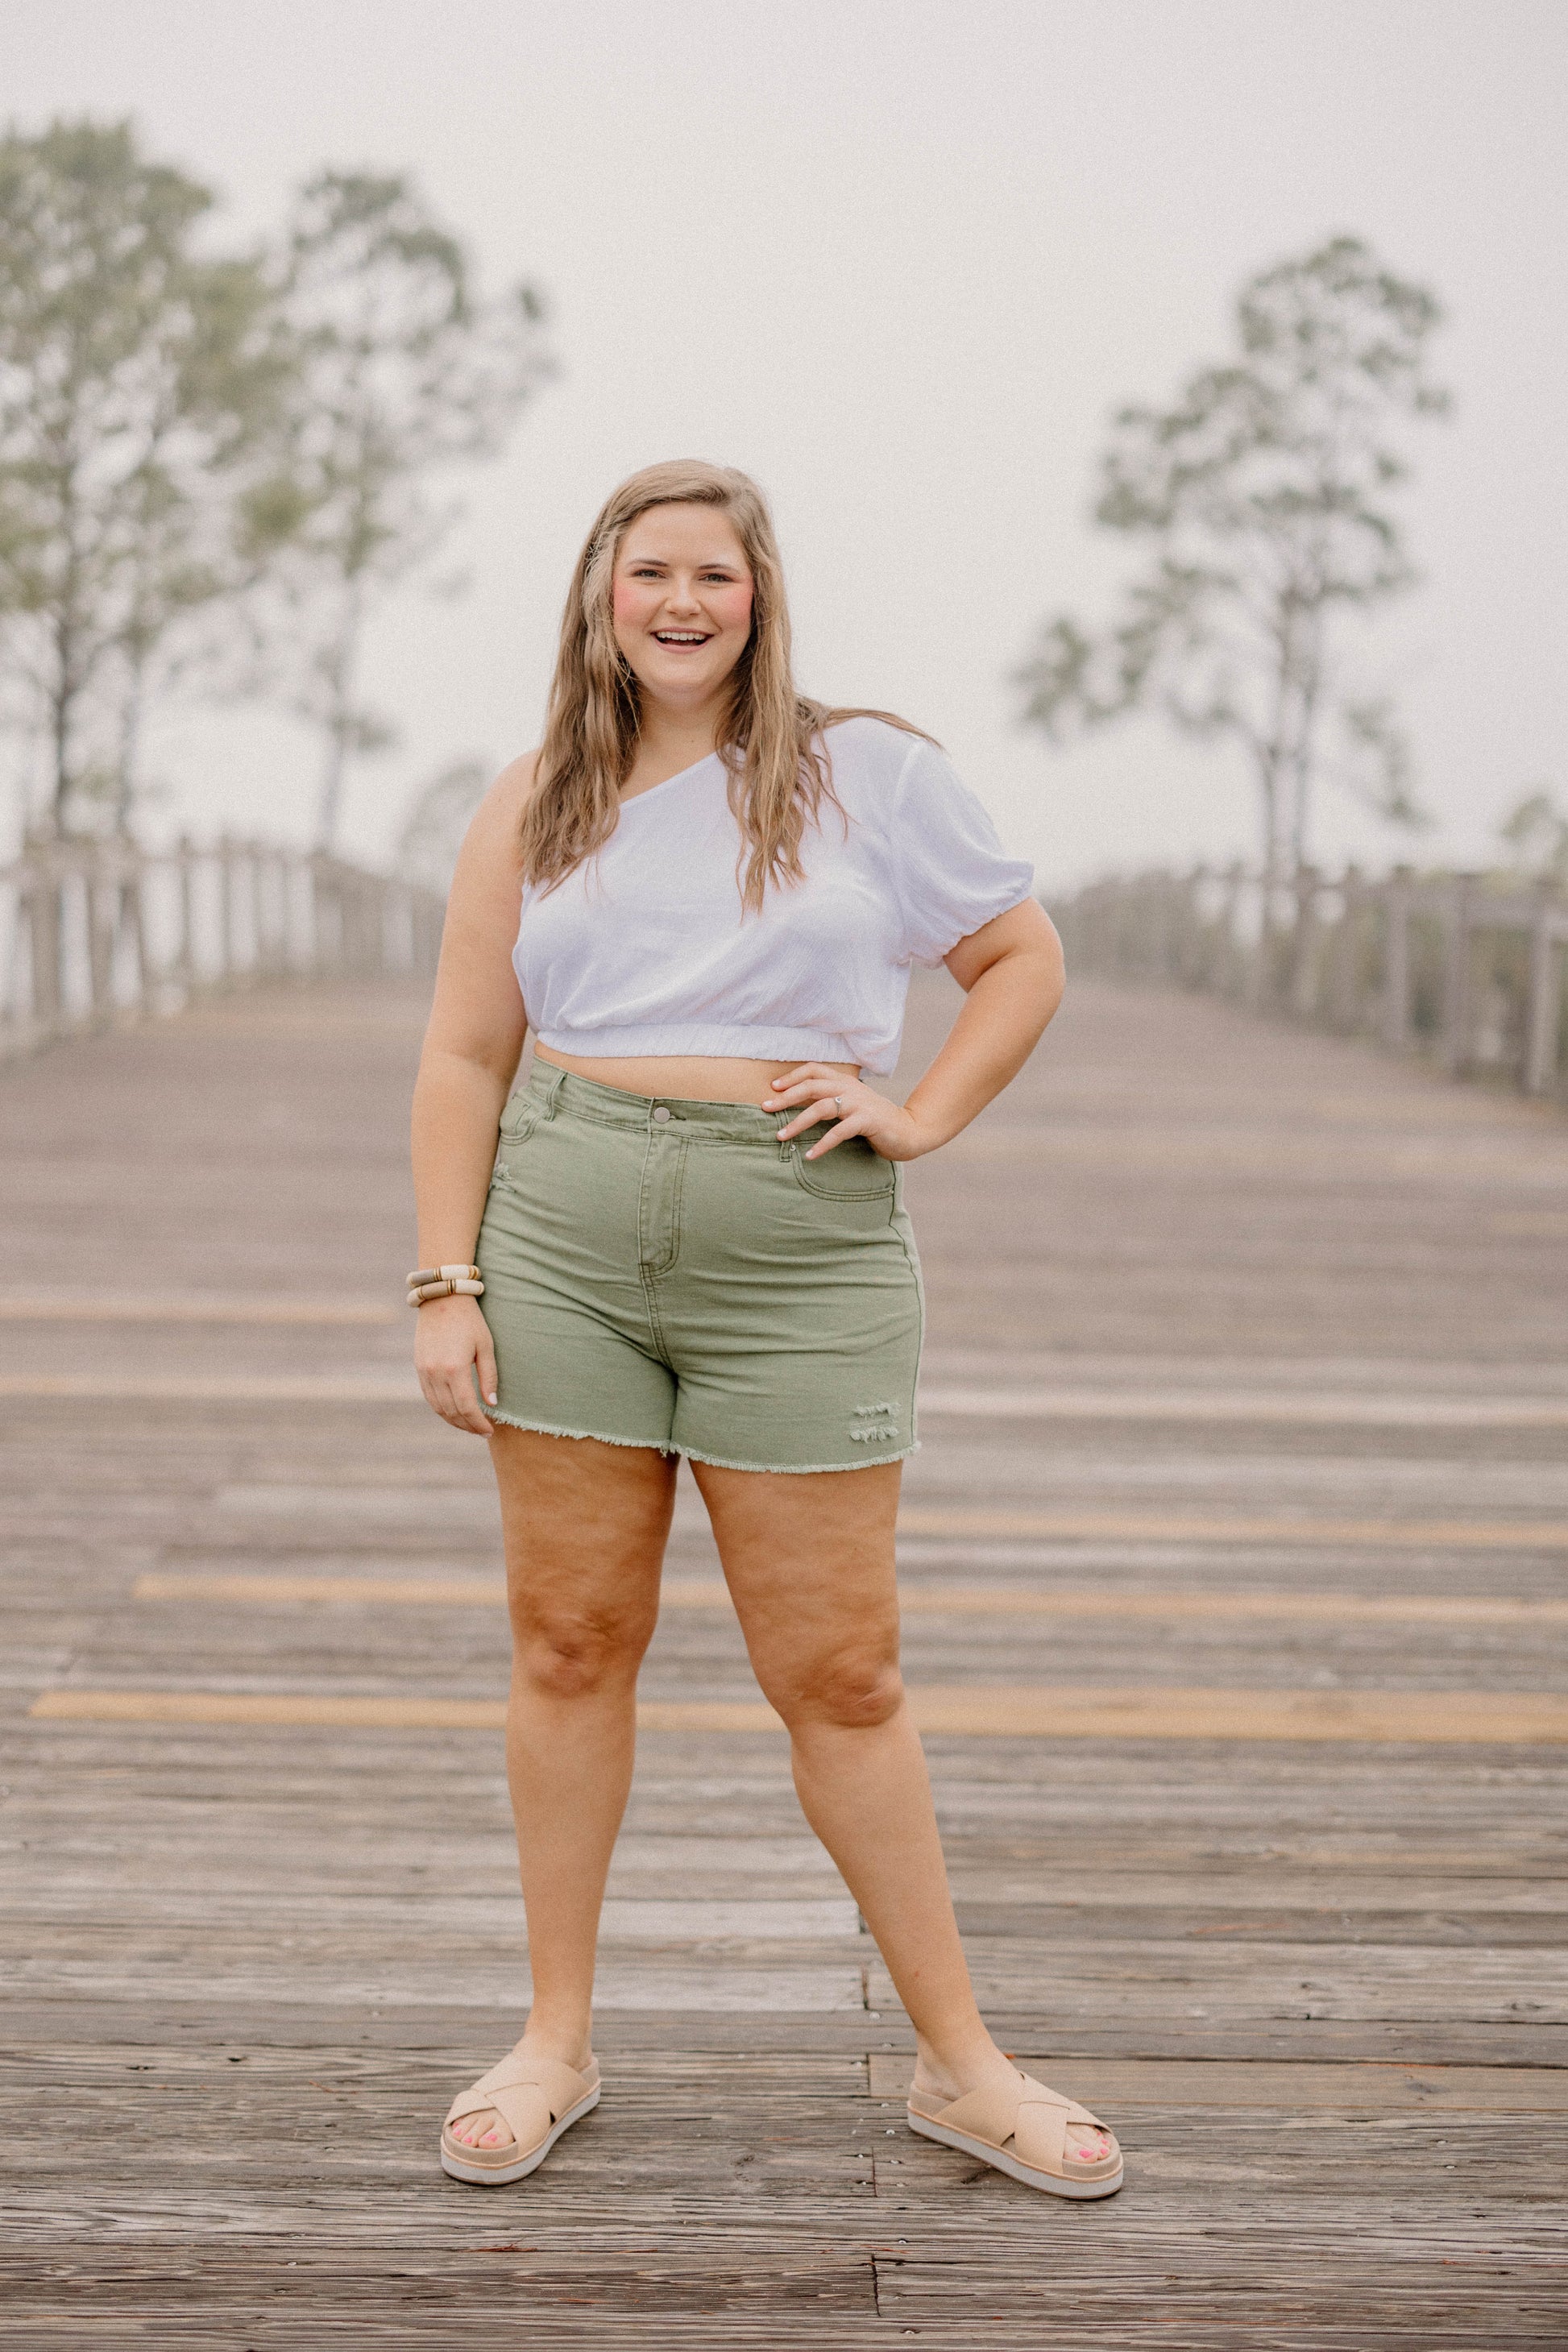 Curvy + Plus Size Denim Shorts in Washed Olive by Hayden LA available at Studio 3:19